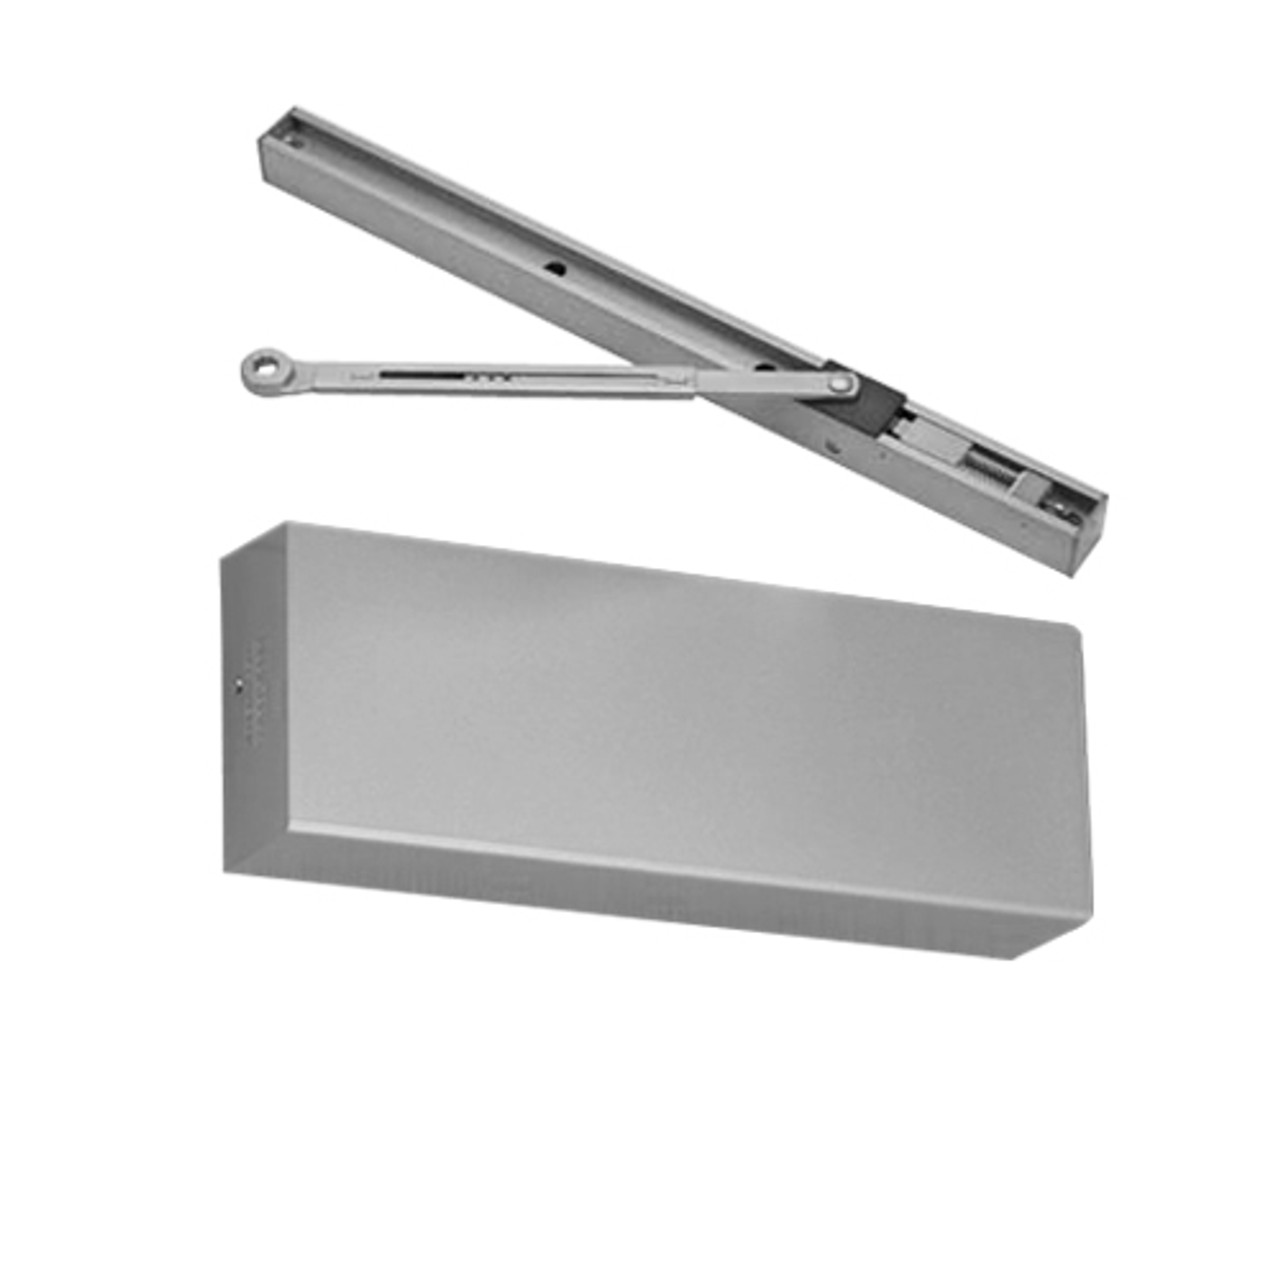 PS9500STDA-689 Norton 9500 Series Non-Hold Open Cast Iron Door Closer with Push Side Slide Track in Aluminum Finish